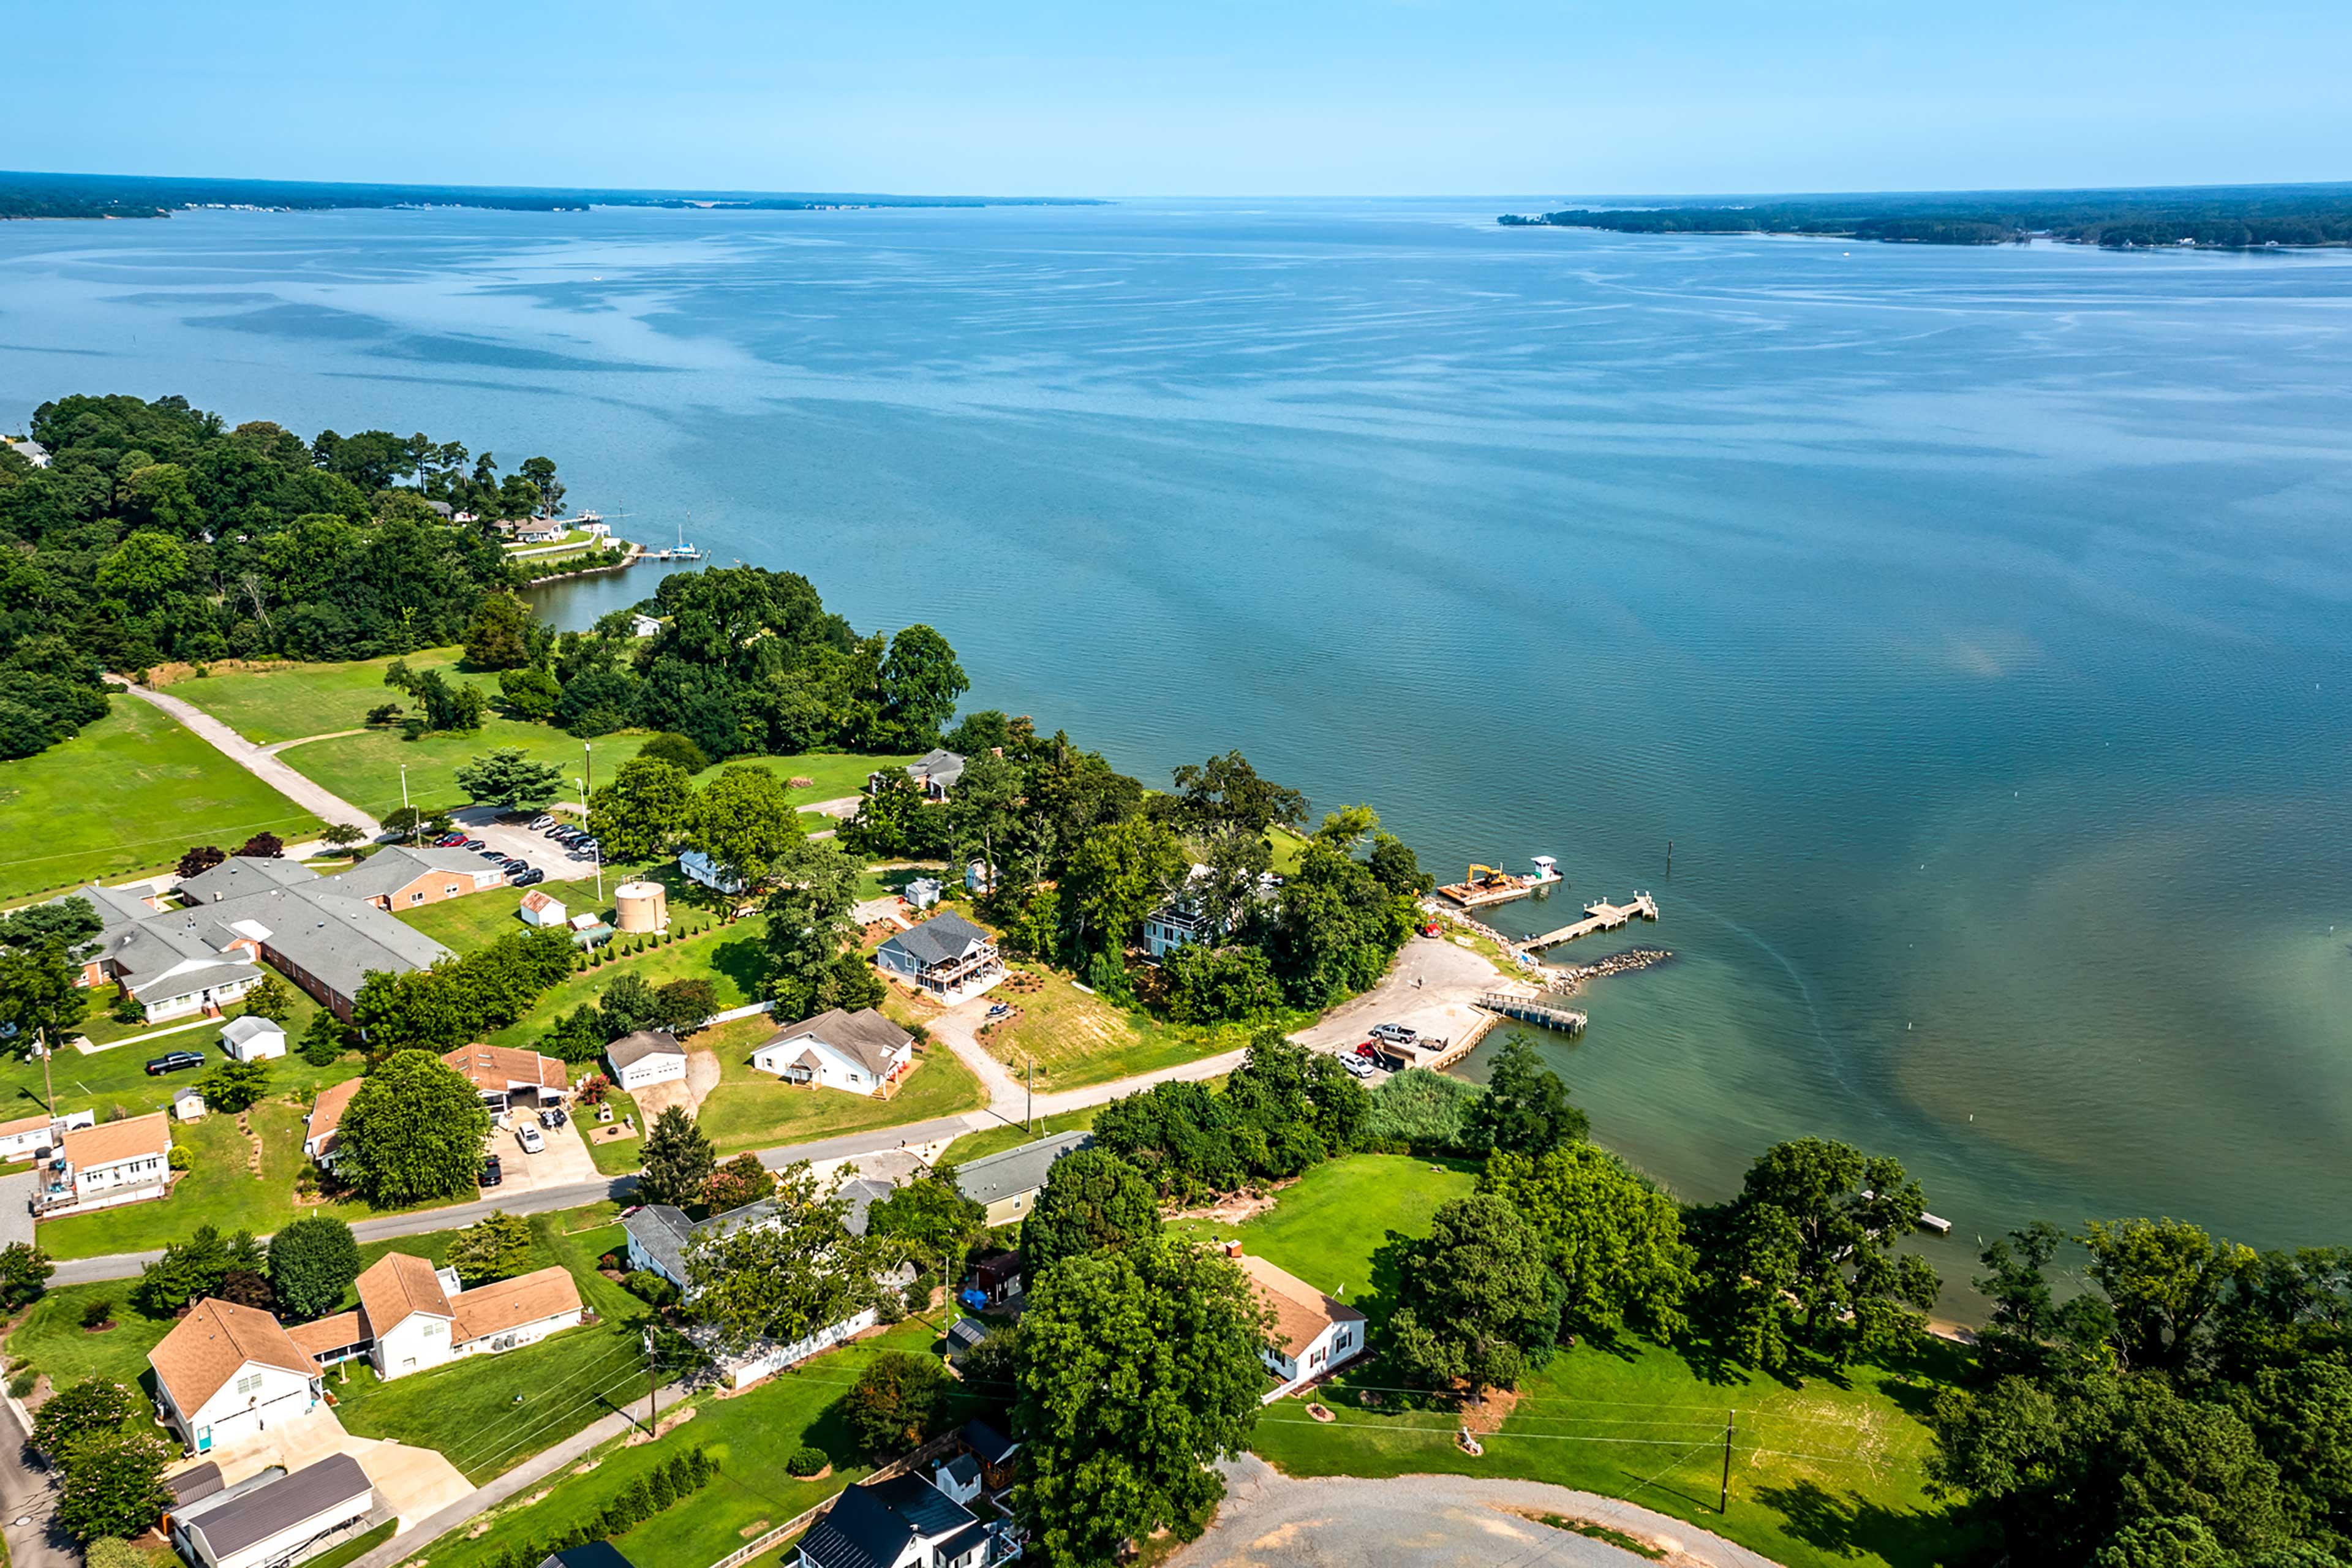 Property Image 2 - Chesapeake Bay Home: 200 Ft to Boat & Fish!